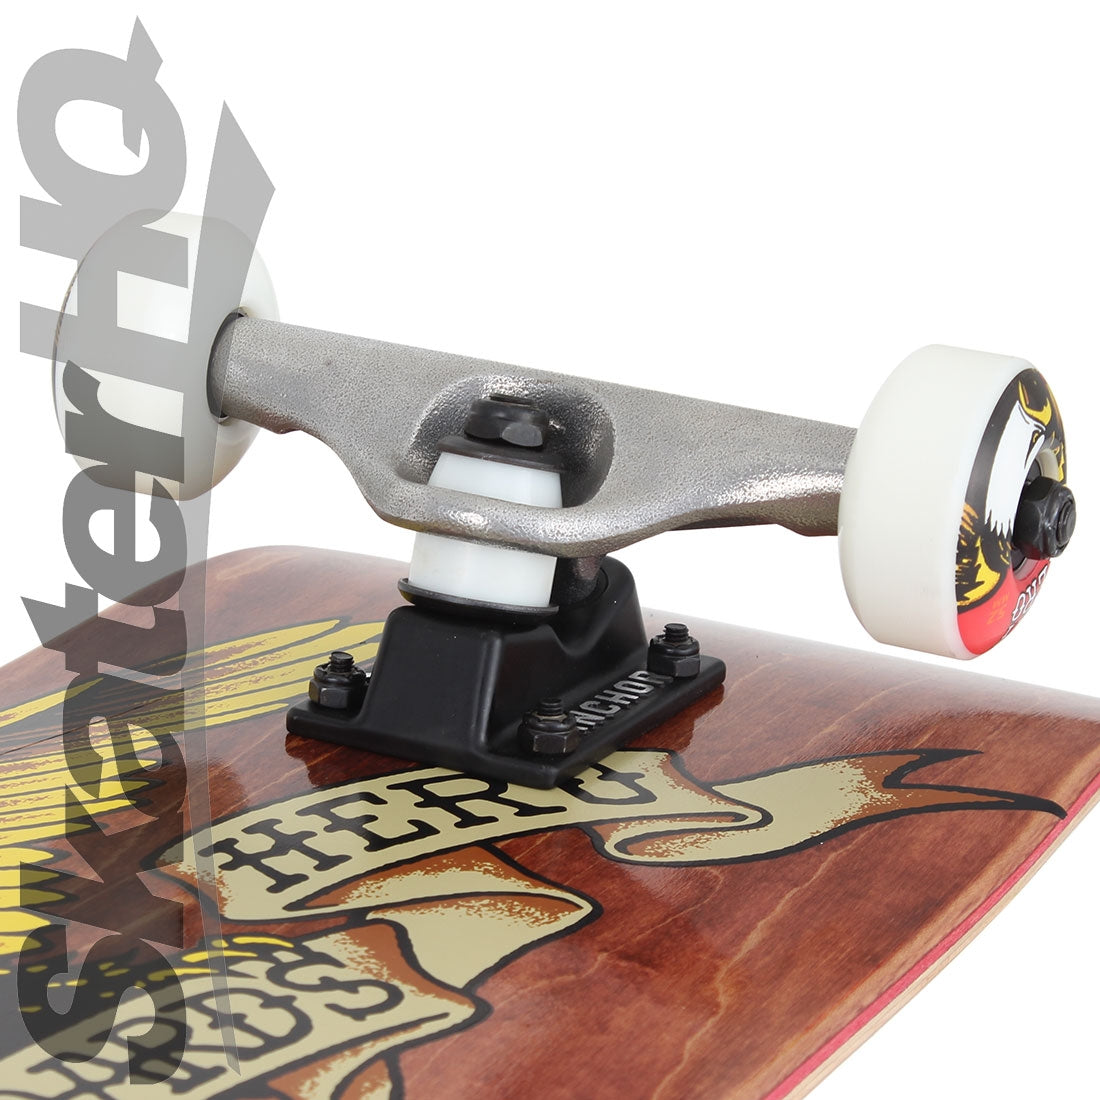 Antihero Eagle Stained 7.75 Complete - Brown Skateboard Completes Modern Street